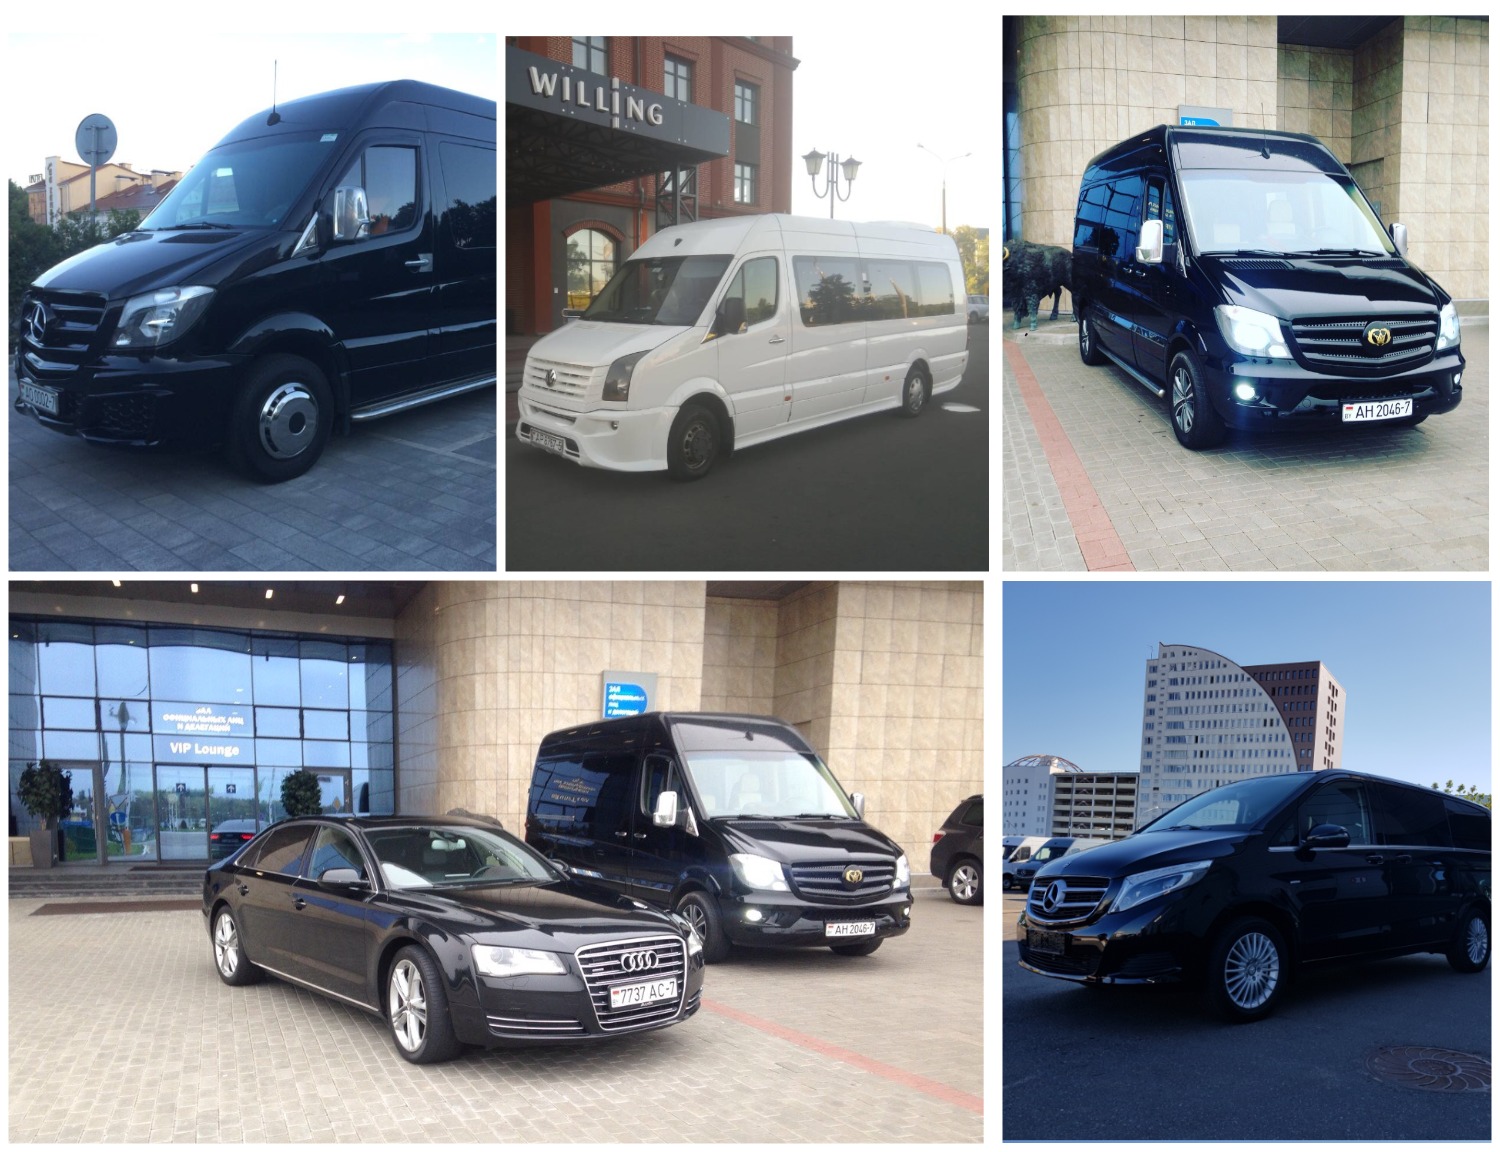 AvtoLimo Company propose rental car service in Minsk and Belarus cities.